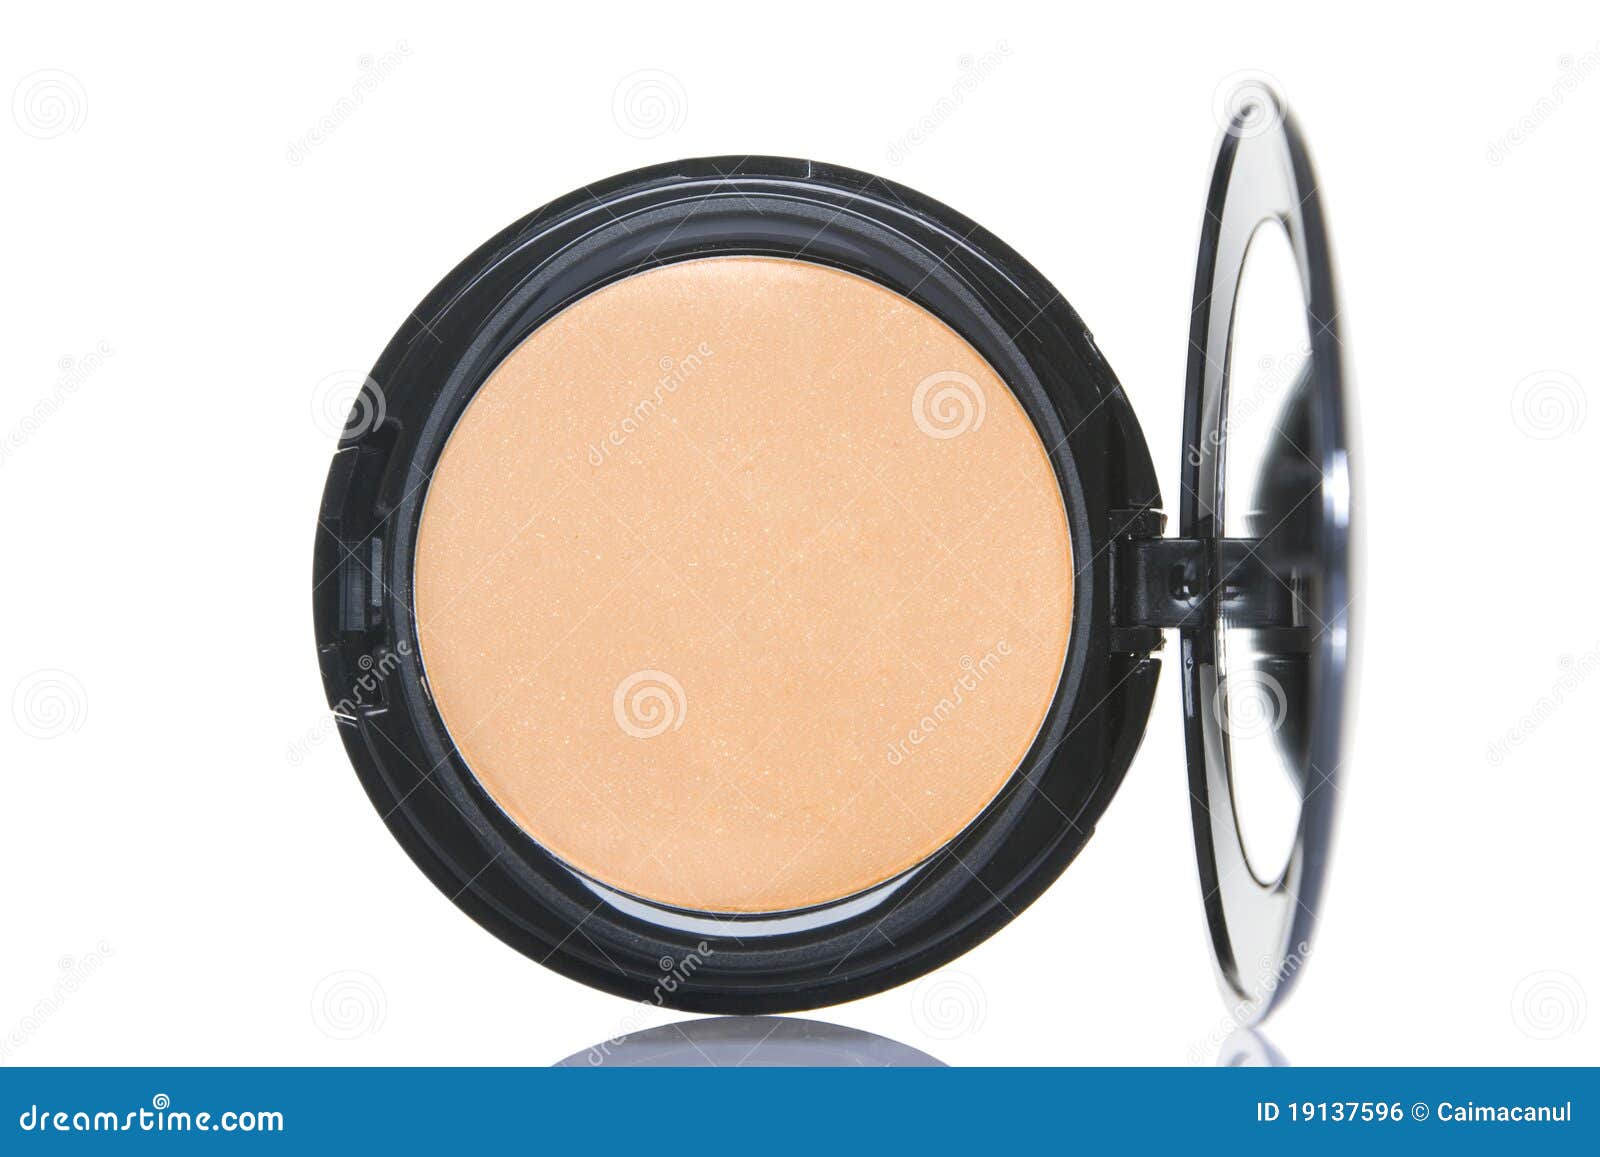 Cosmetic powder. Make-up powder in box isolated on white